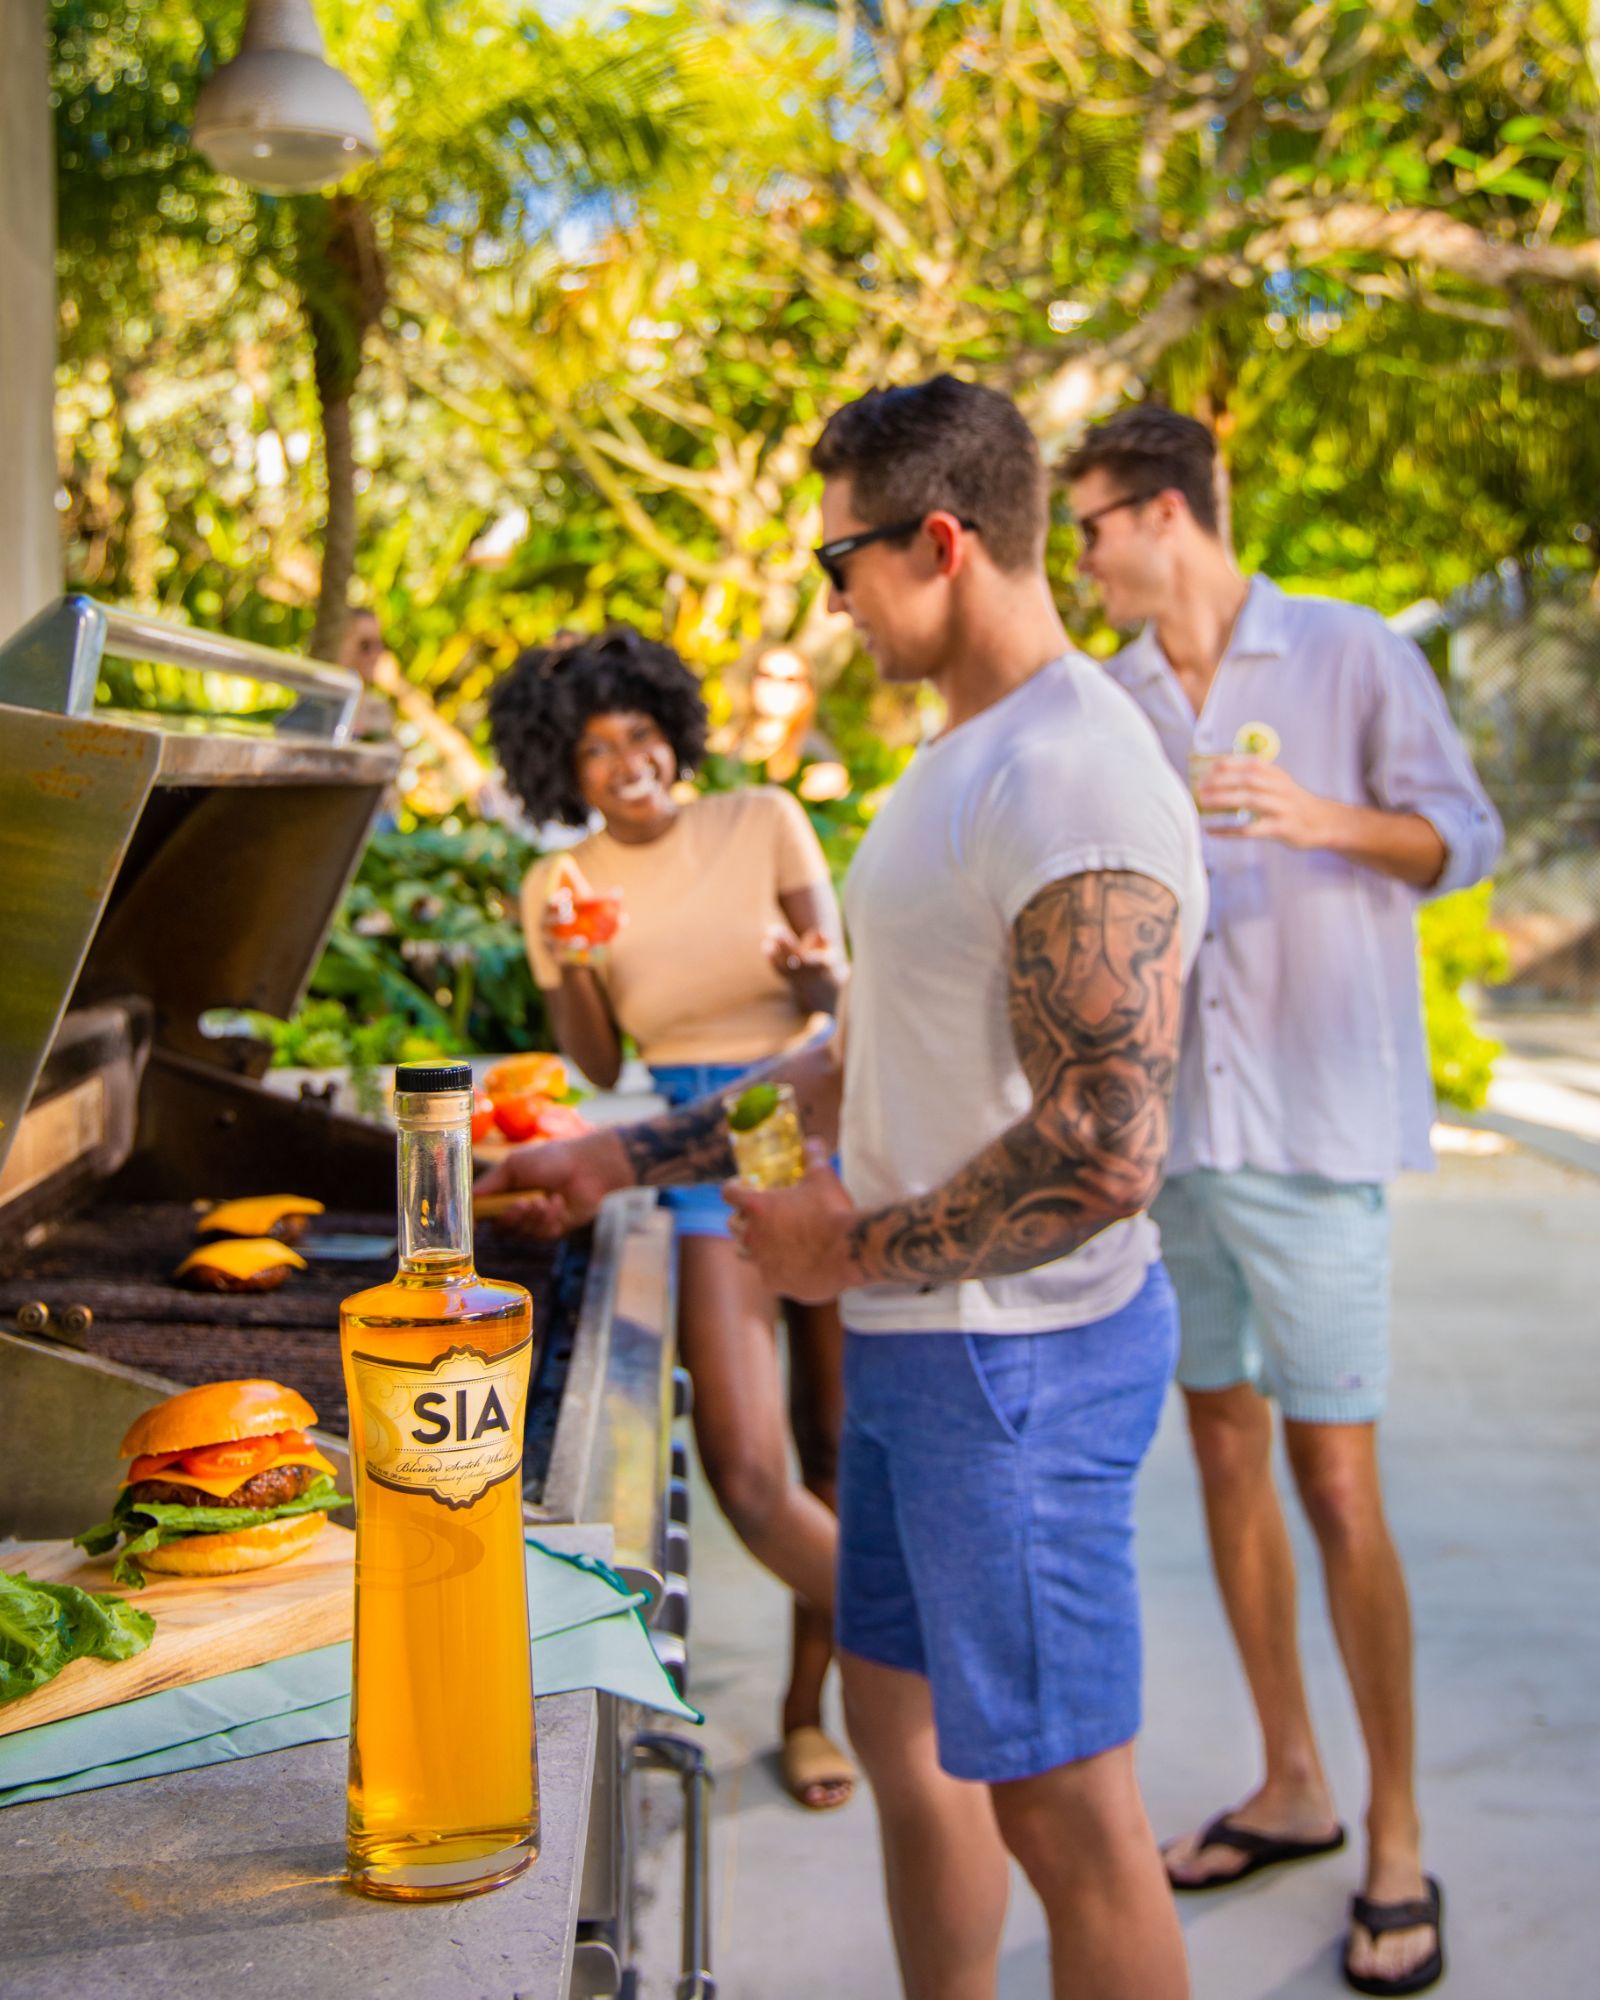 Men and women grilling behind a bottle of SIA Blended Scotch Whisky